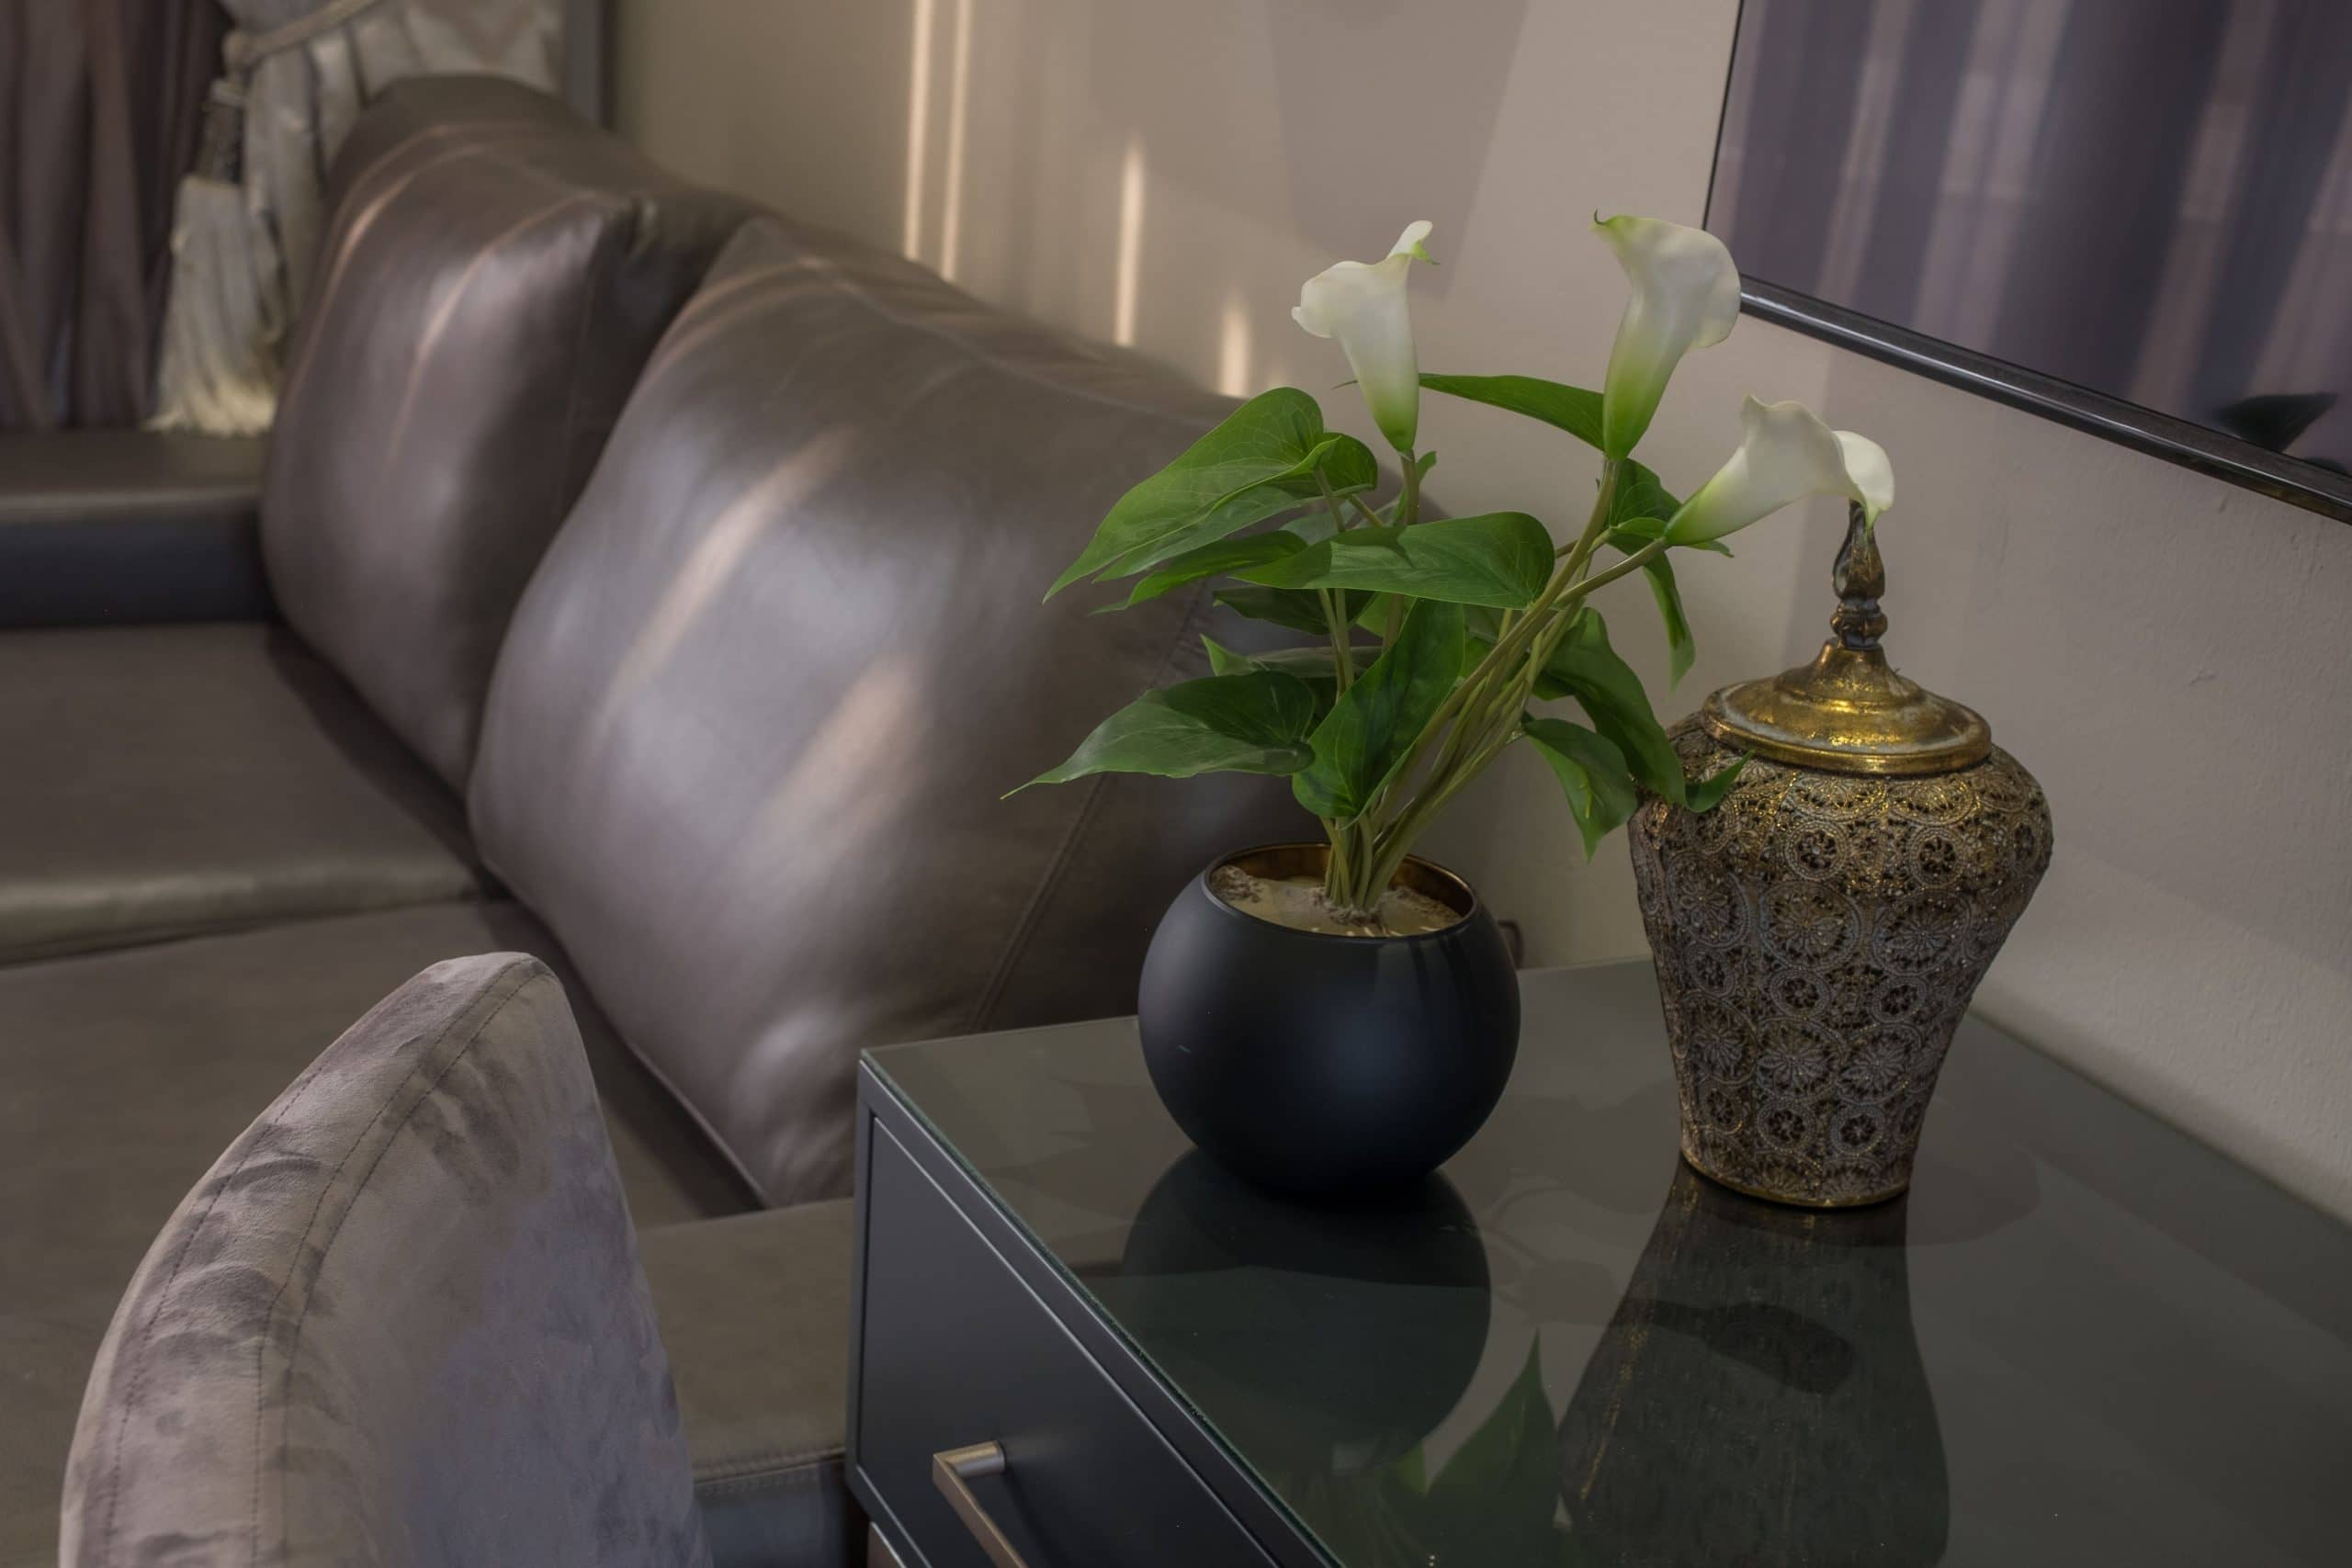 Potted plant and ornament on desk next to a leather couch